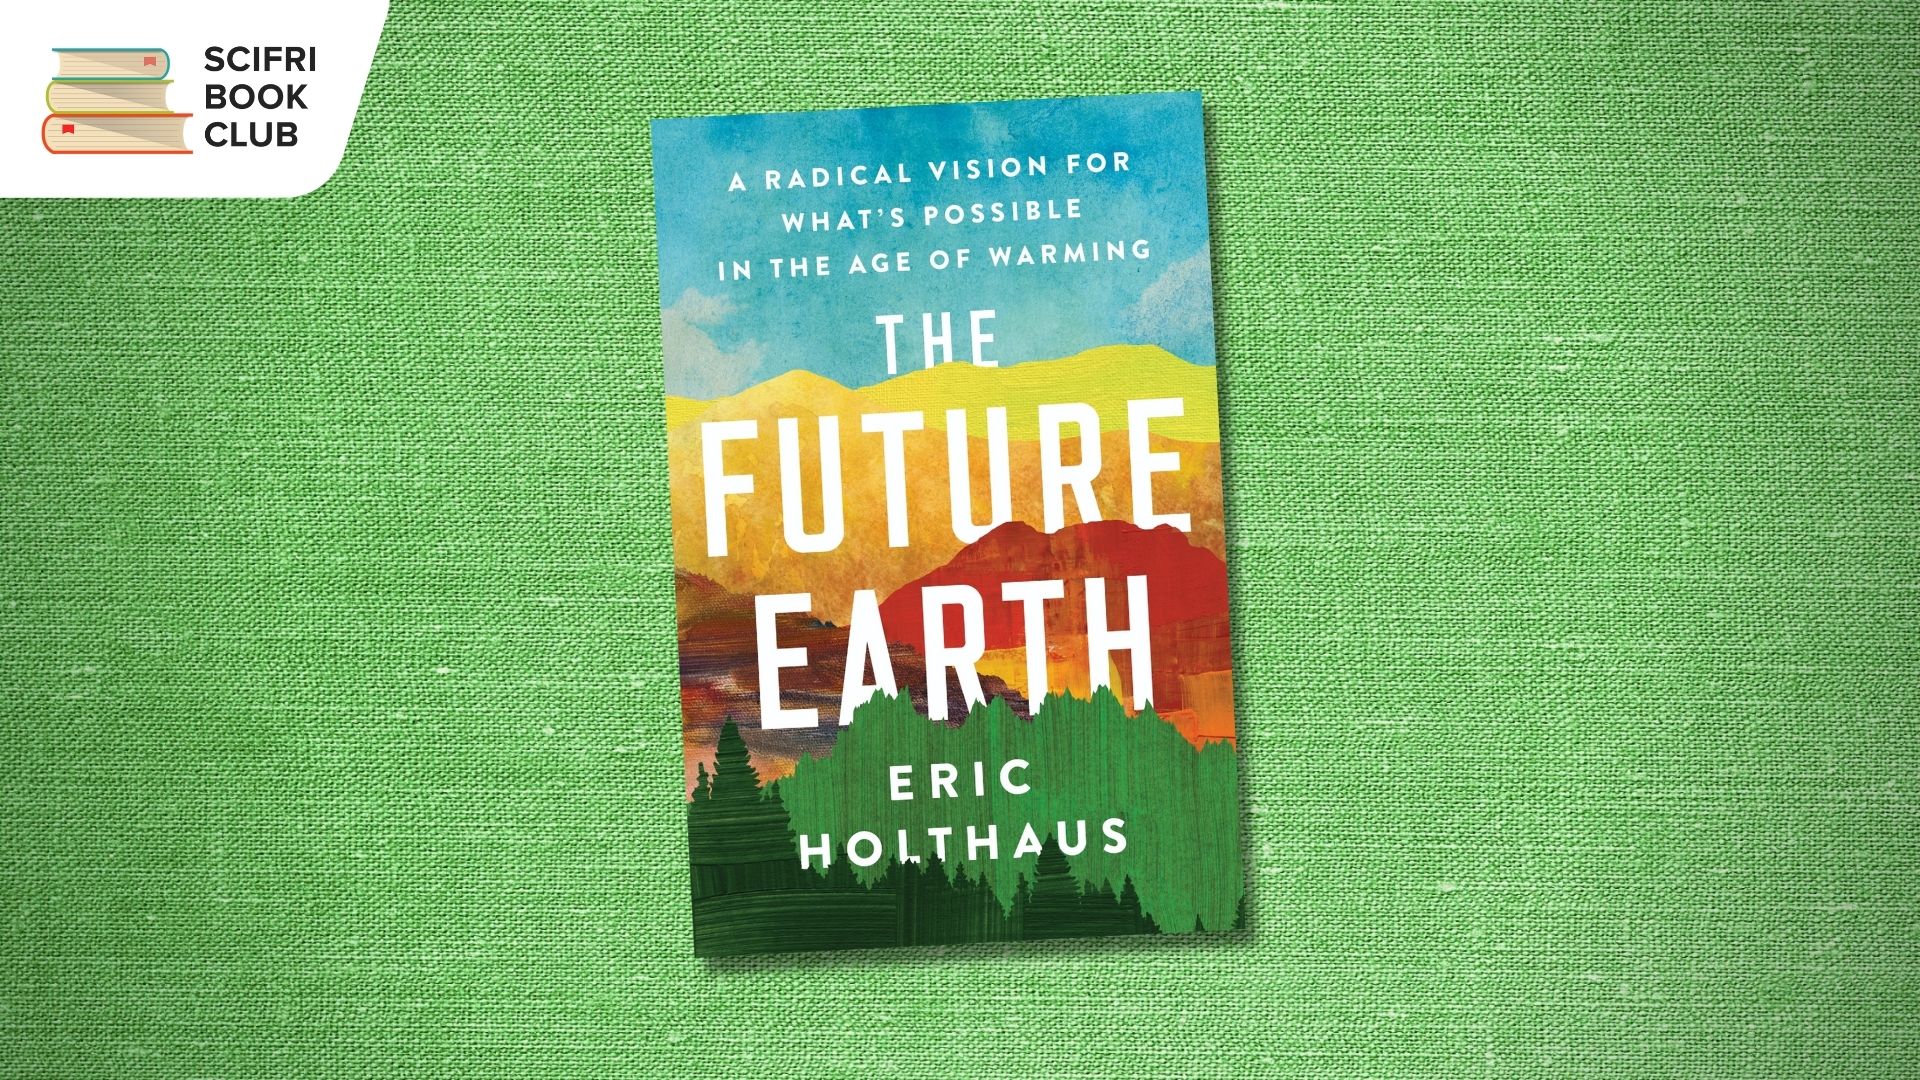 The book cover of THE FUTURE EARTH by Eric Holthaus, in the center, with a photo background featuring a green canvas texture. The logo for the SciFri Book Club in the top left corner.